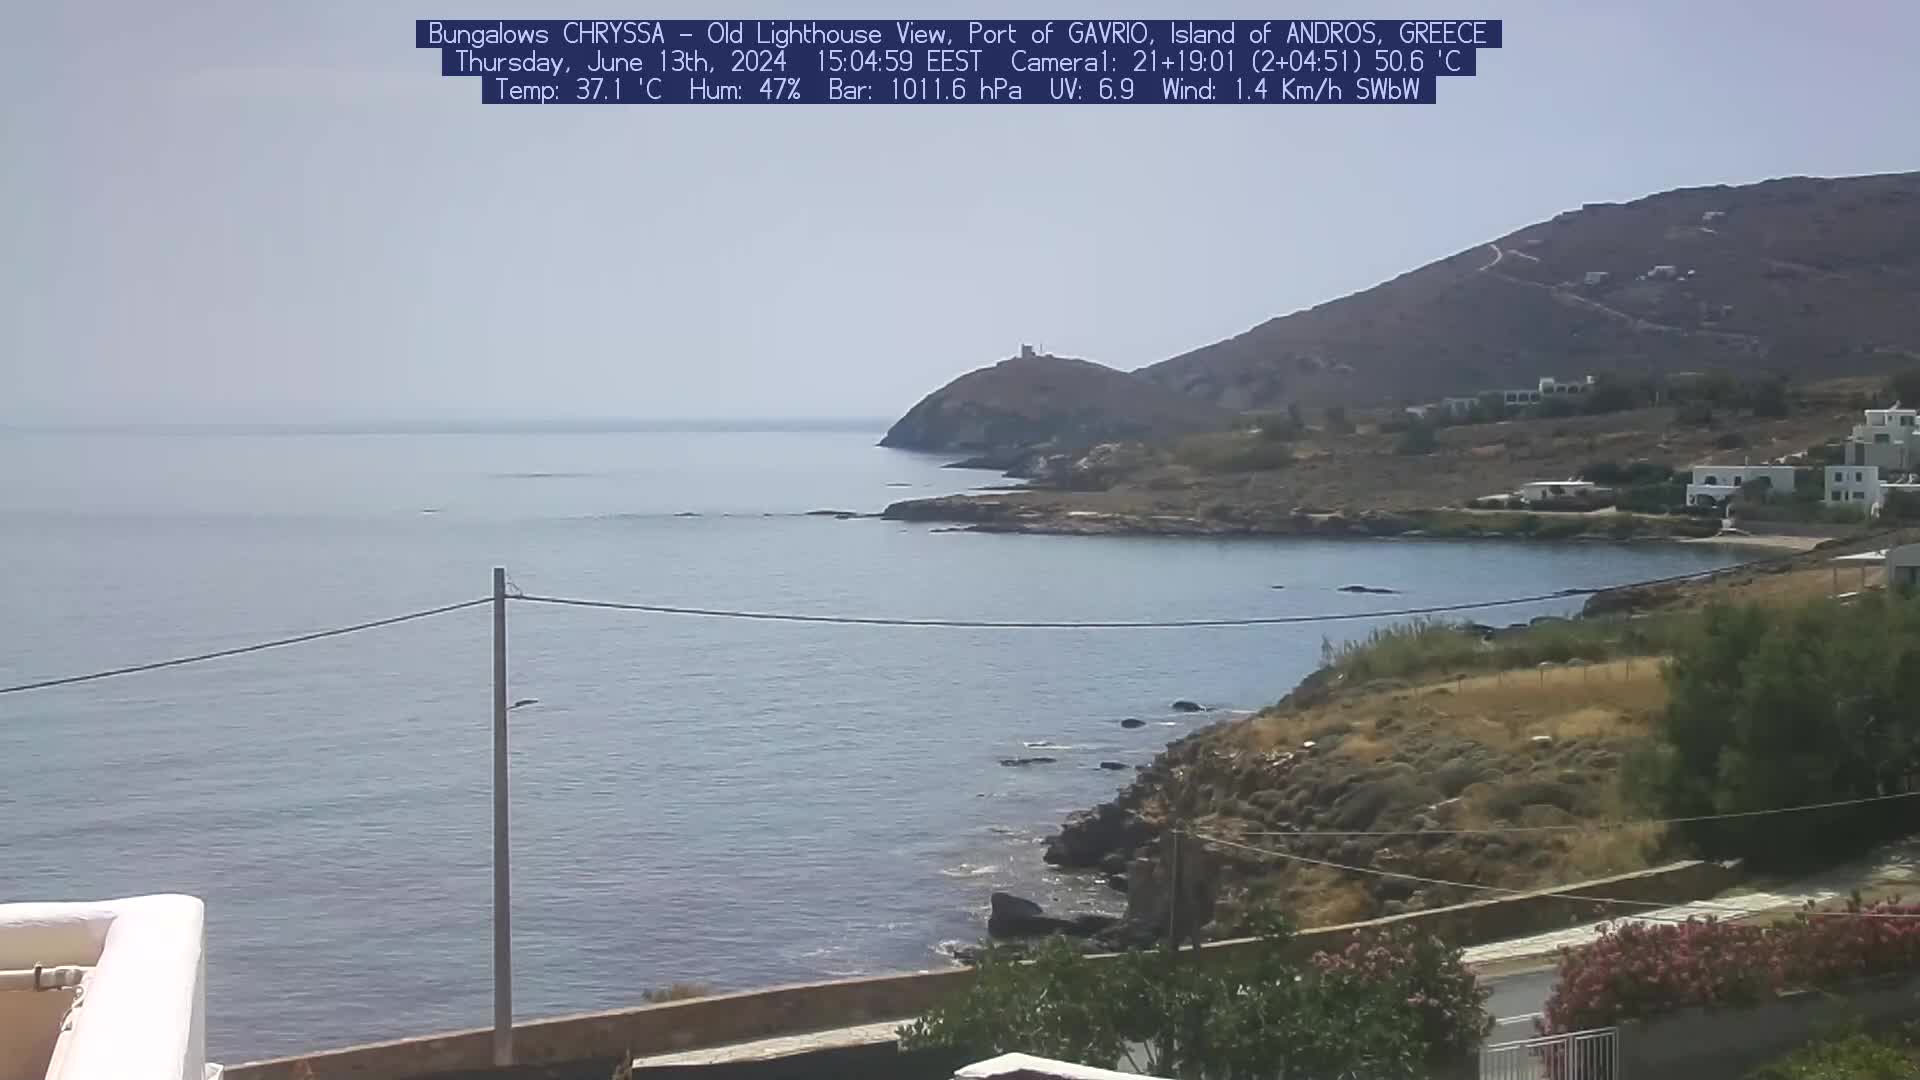 Andros - Gavrion Mar. 15:05